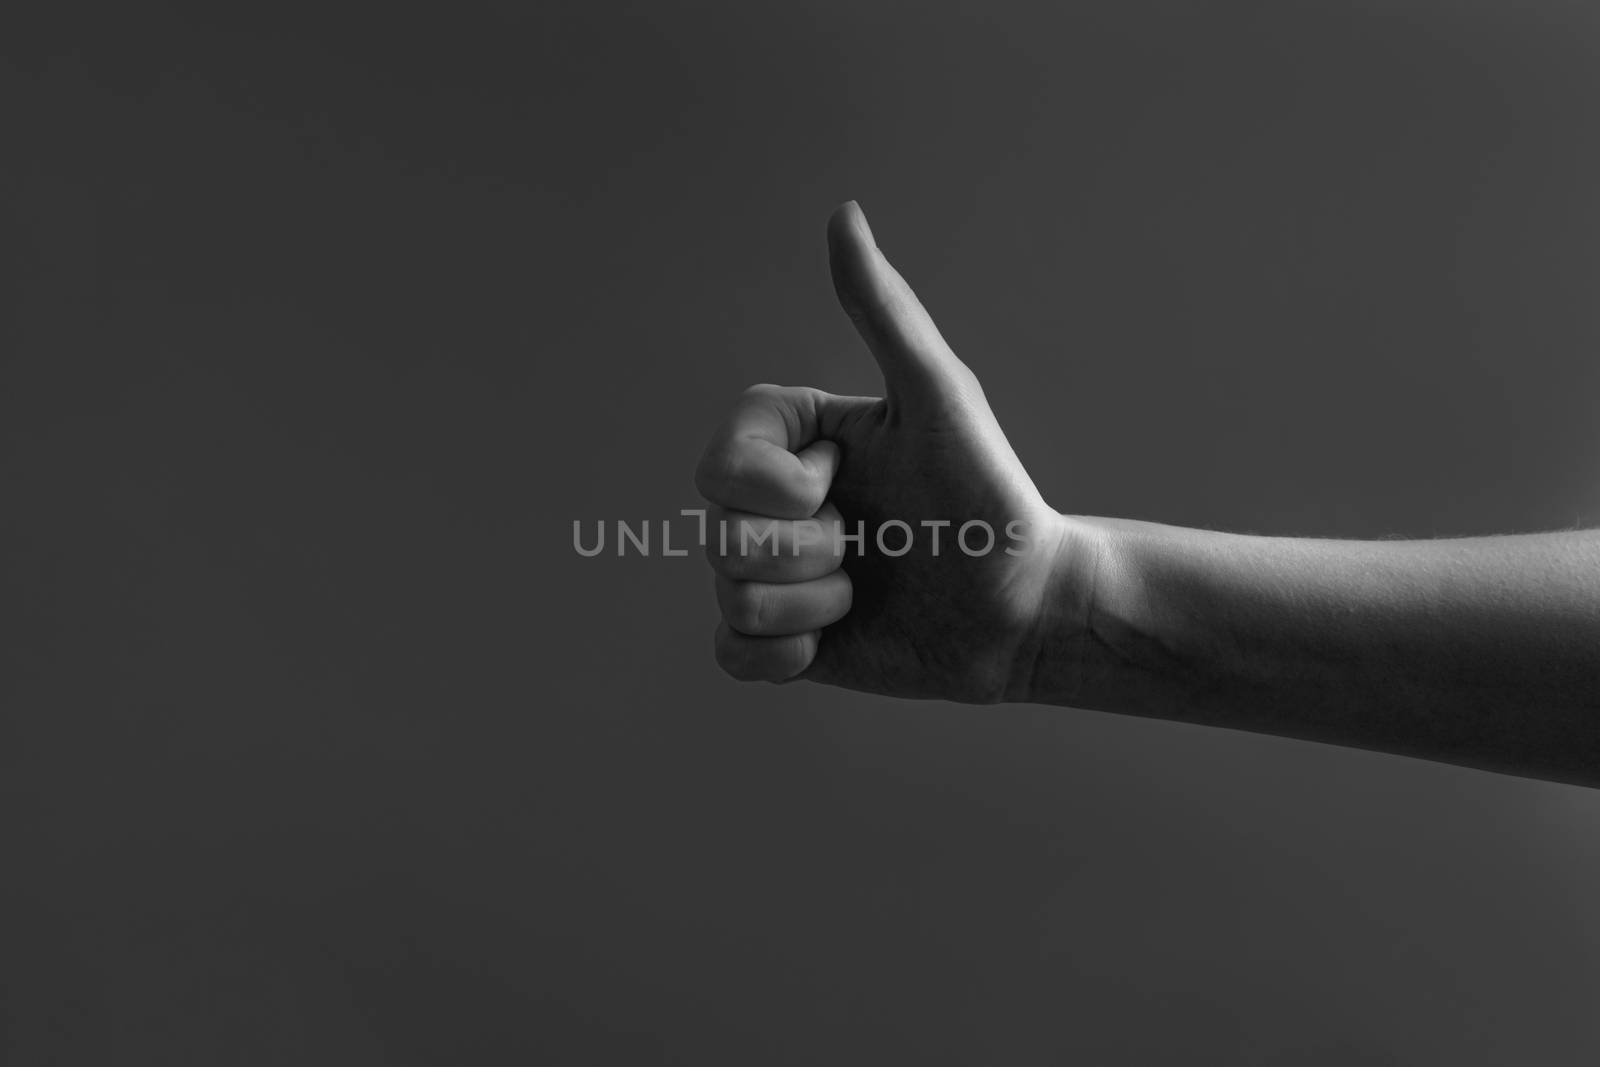 Thumbs up, approval gesture concept. Hand showing a "thumb up" sign in low key background